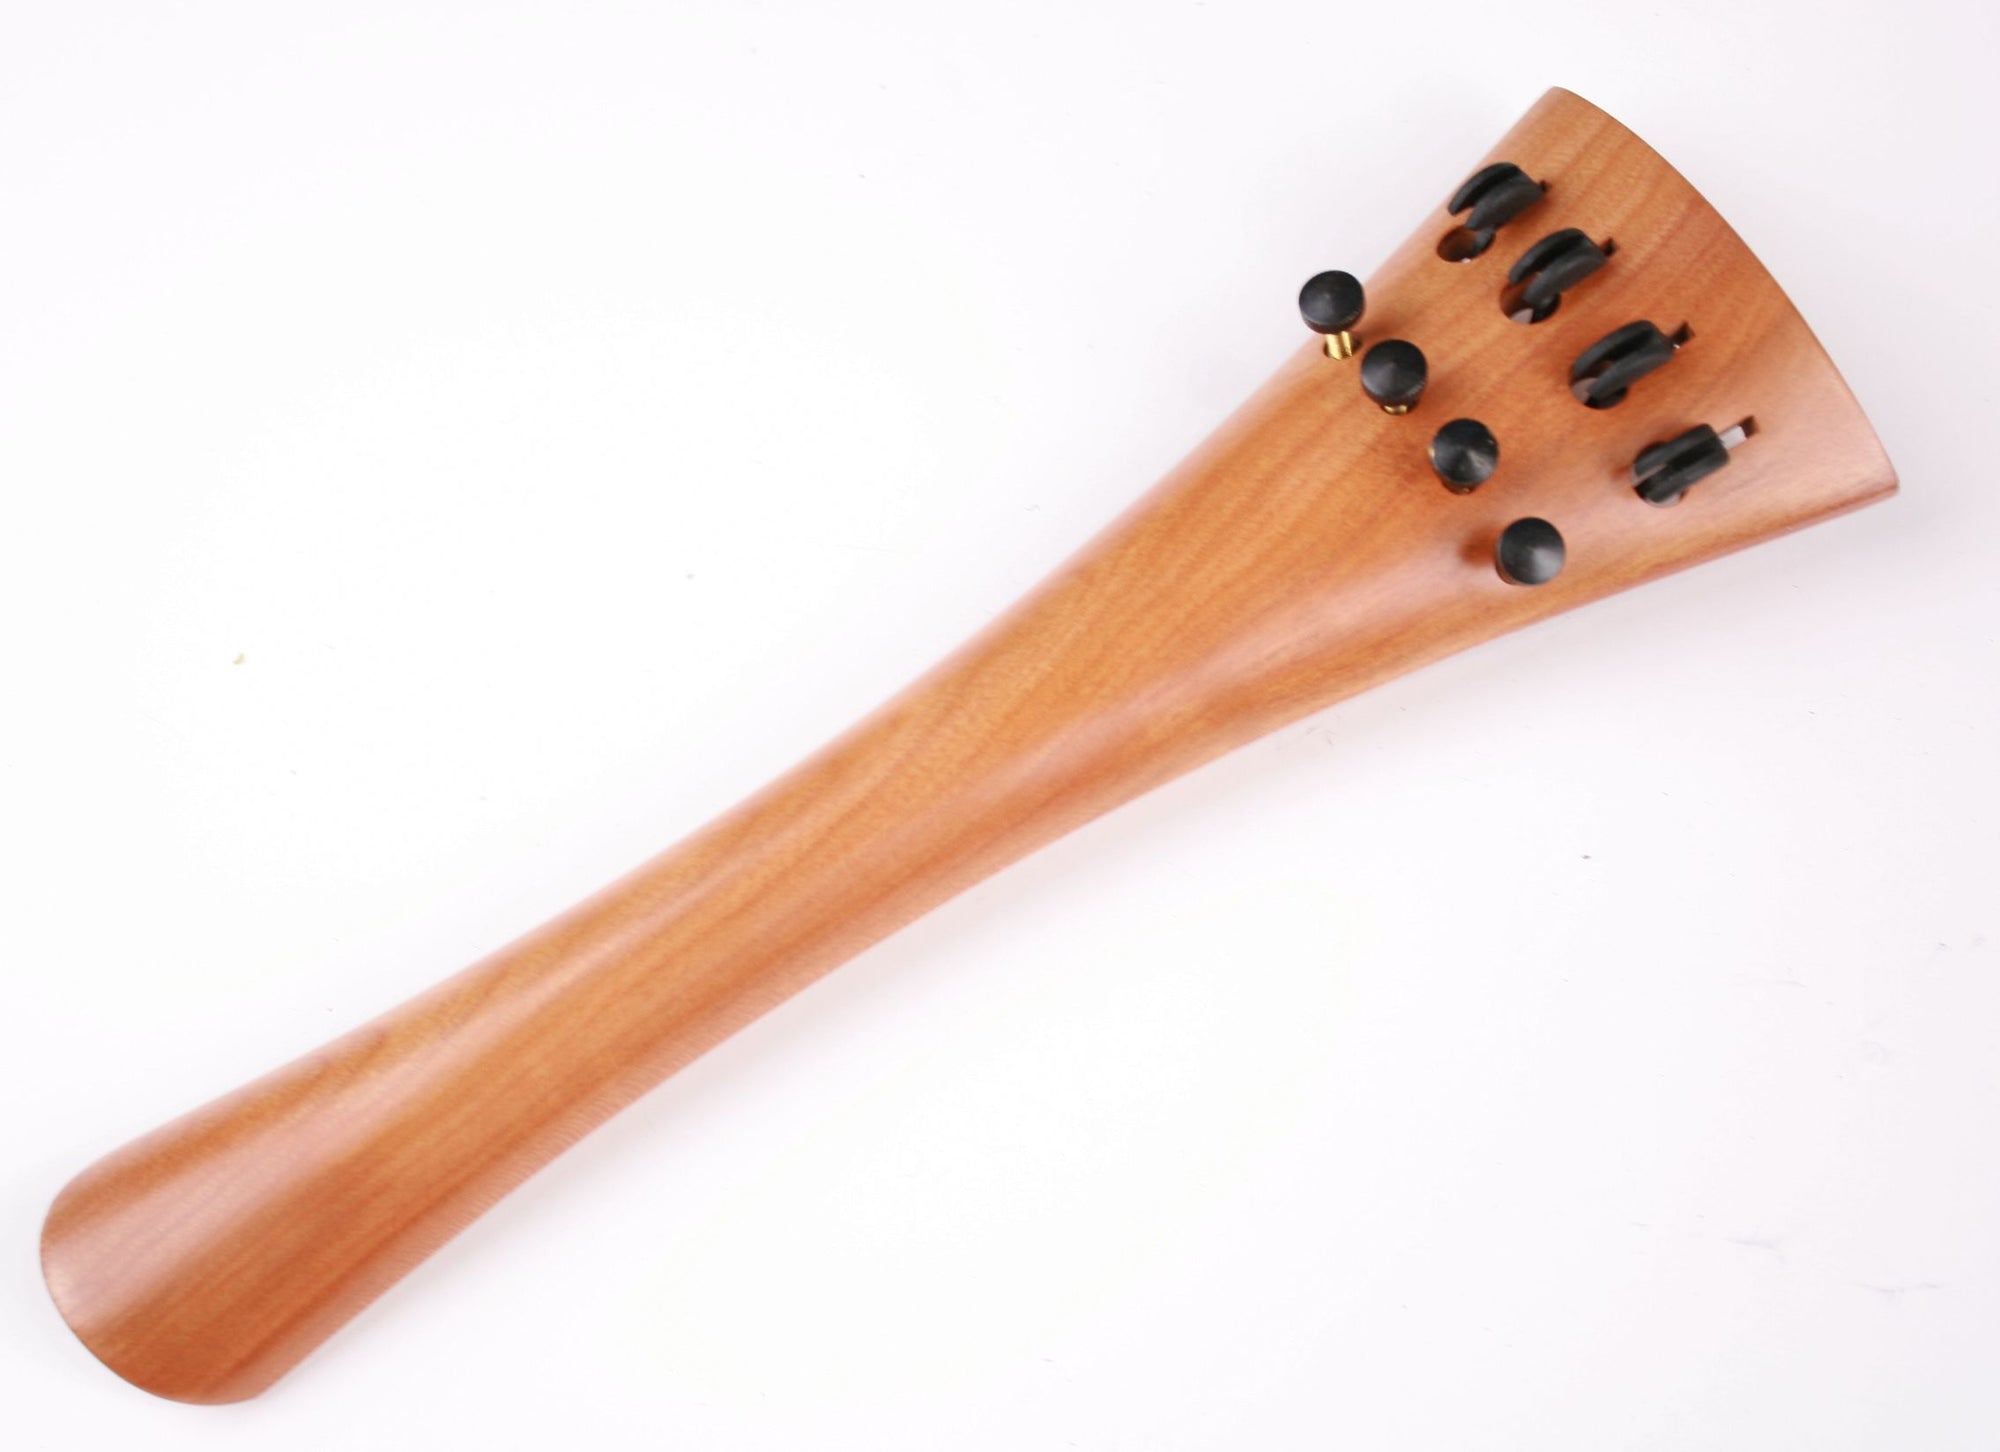 Cello tailpiece-French-"Schmidt" model-Cherry wood-4 carbon fiber tuners